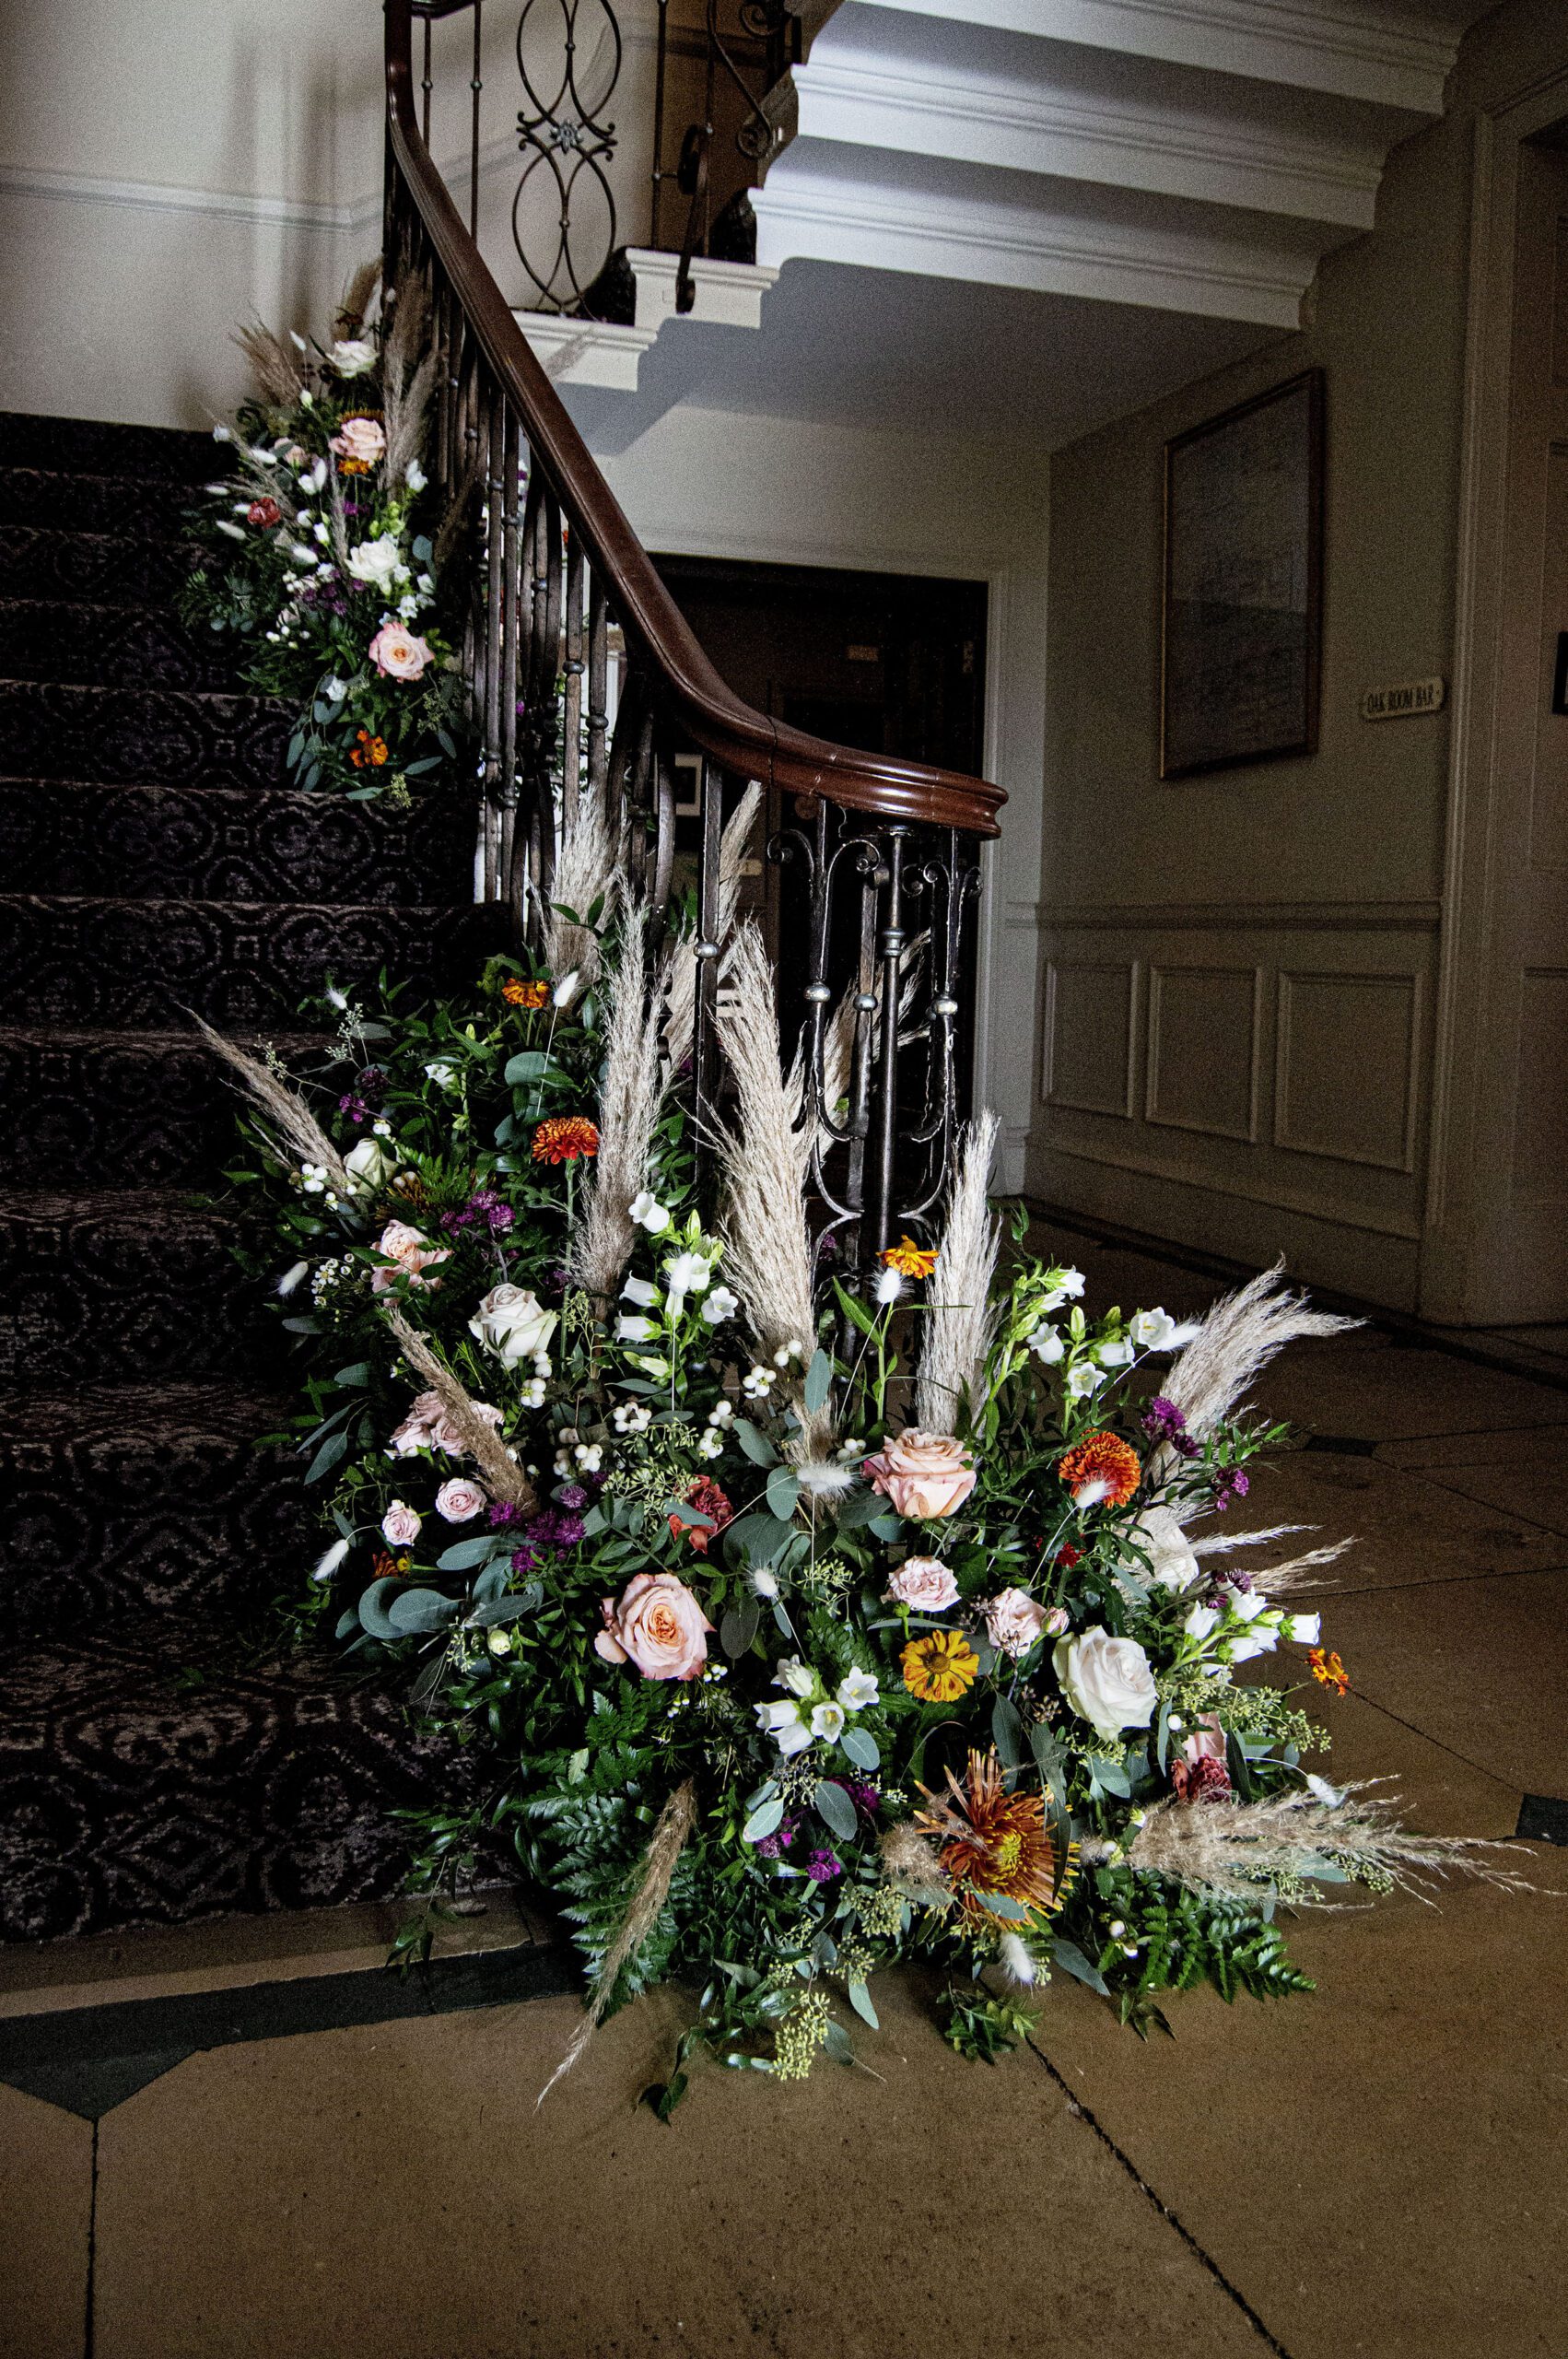 woodhall-hotel-staircase-flowers-wedding-1-scaled Grid No Space 5 Columns